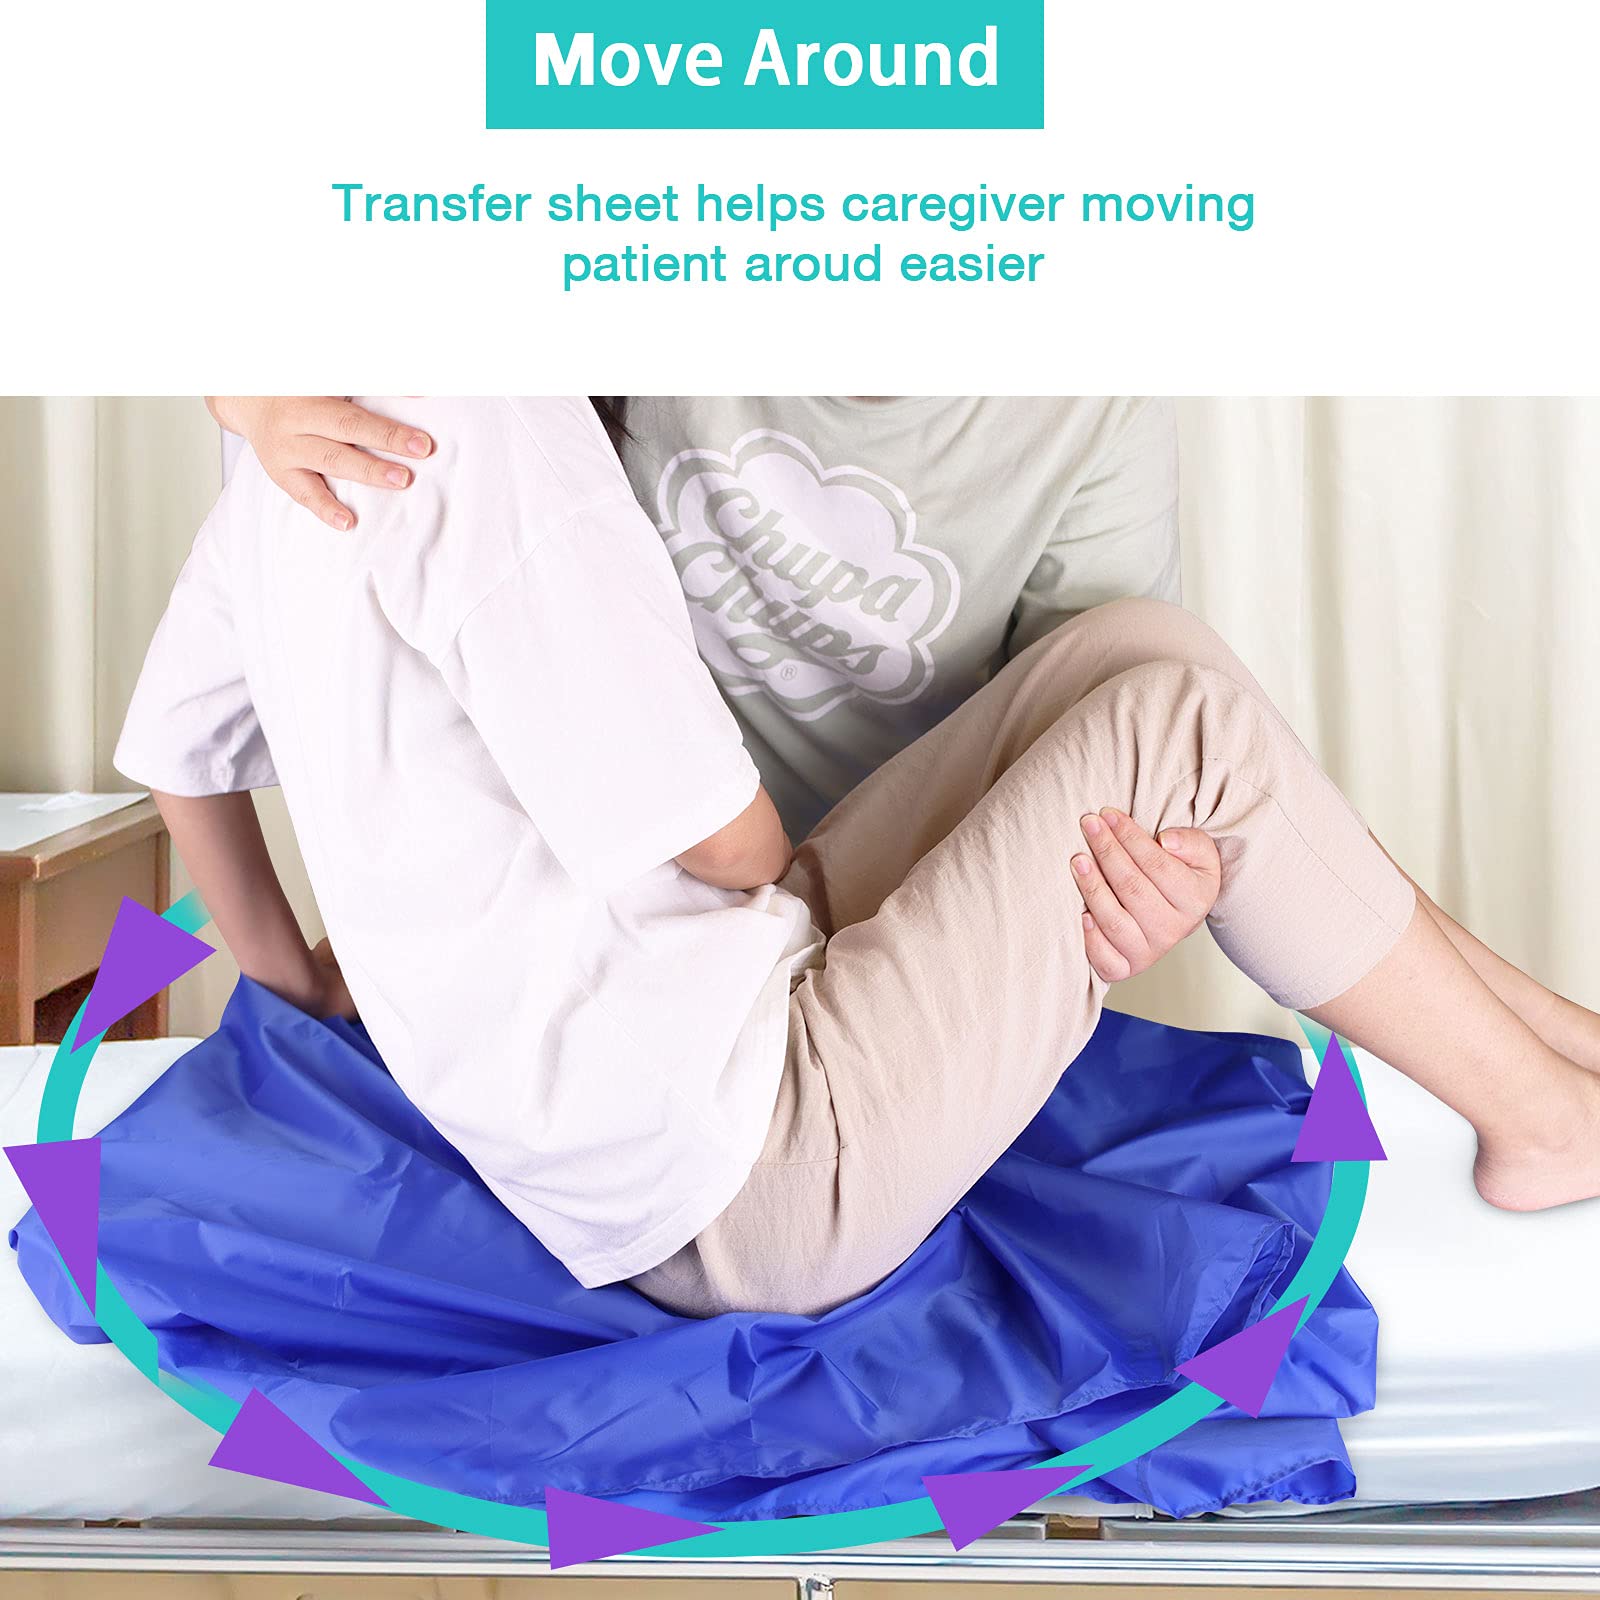 CareFound 28” x 55” Slide Sheet for Transferring, Turning, and Repositioning in Beds-Assist Moving Elderly - for Cars, Vehicles, Wheelchairs Transfers -Used for Hospitals & Home Care